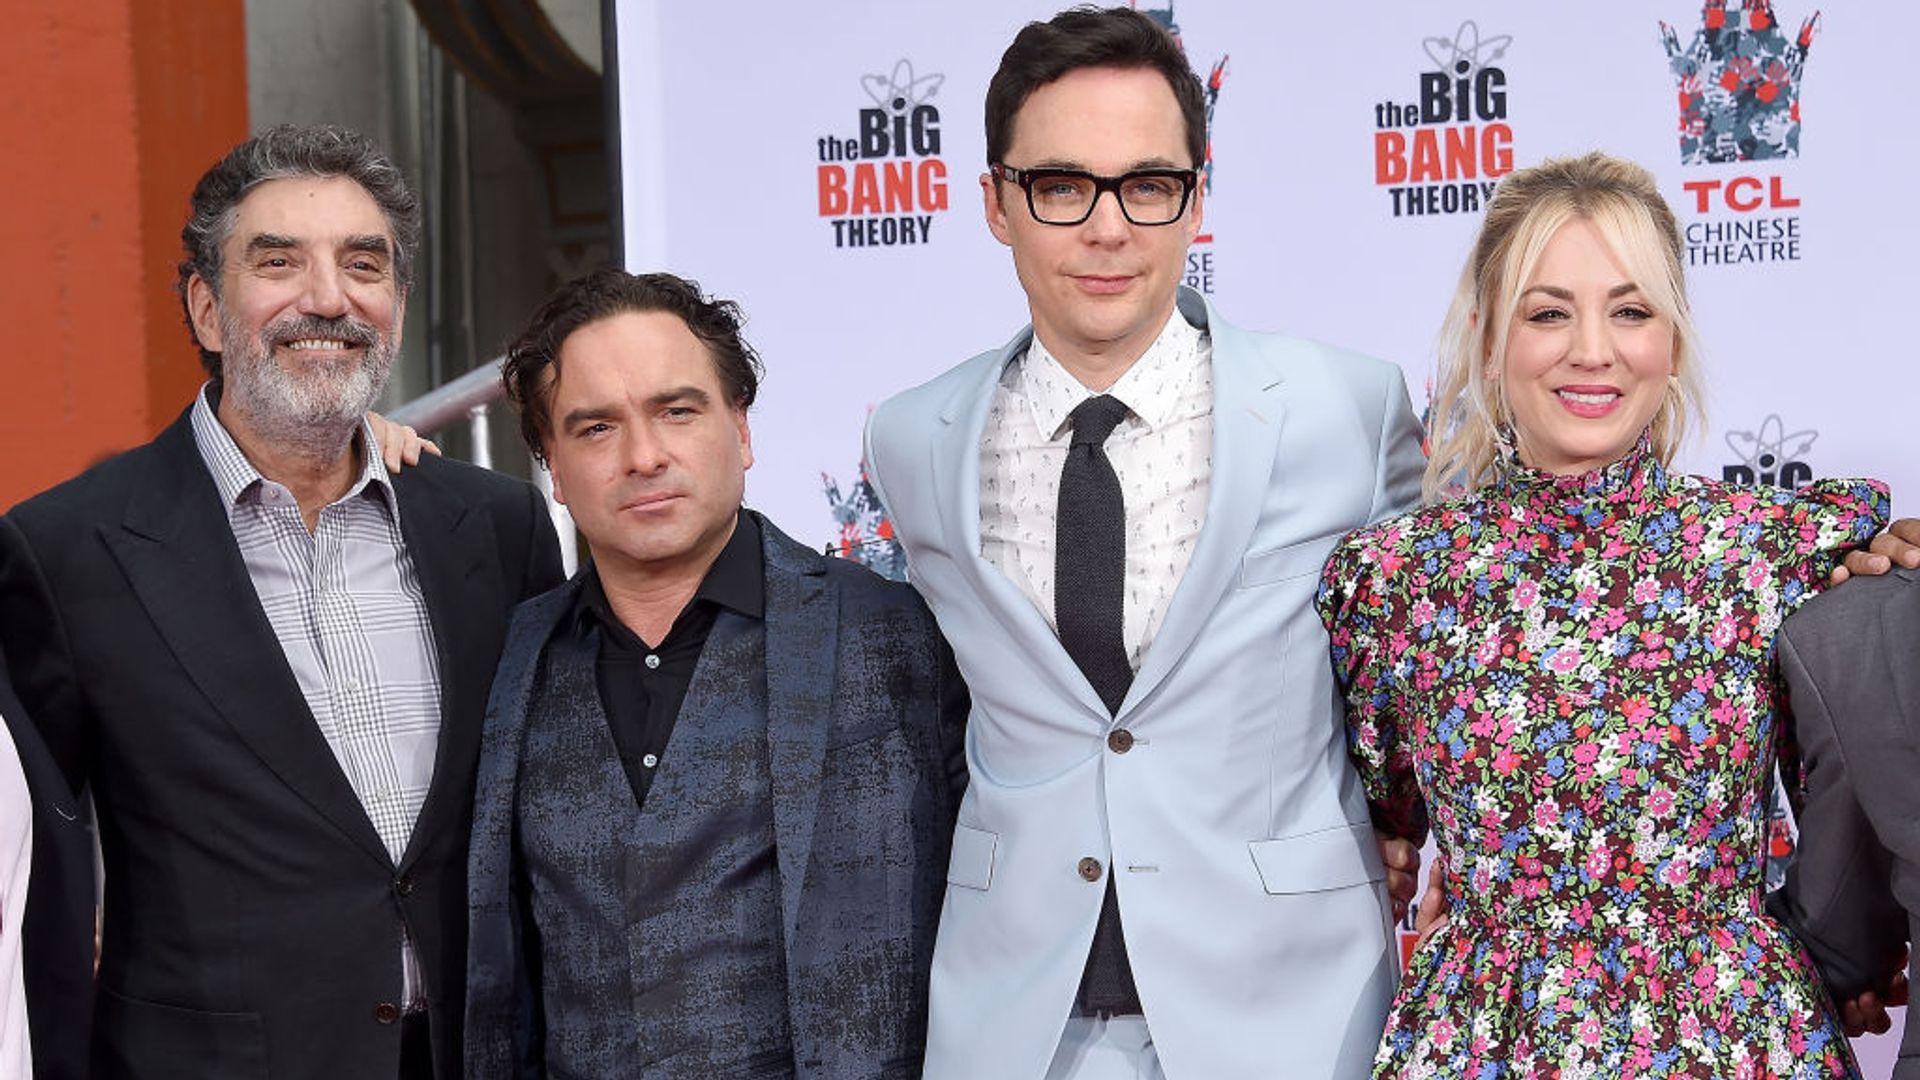 Chuck Lorre, Johnny Galecki, Jim Parsons, and Kaley Cuoco of The Cast Of "The Big Bang Theory" Place Their Handprints In The Cement At The TCL Chinese Theatre IMAX Forecourt on May 1, 2019